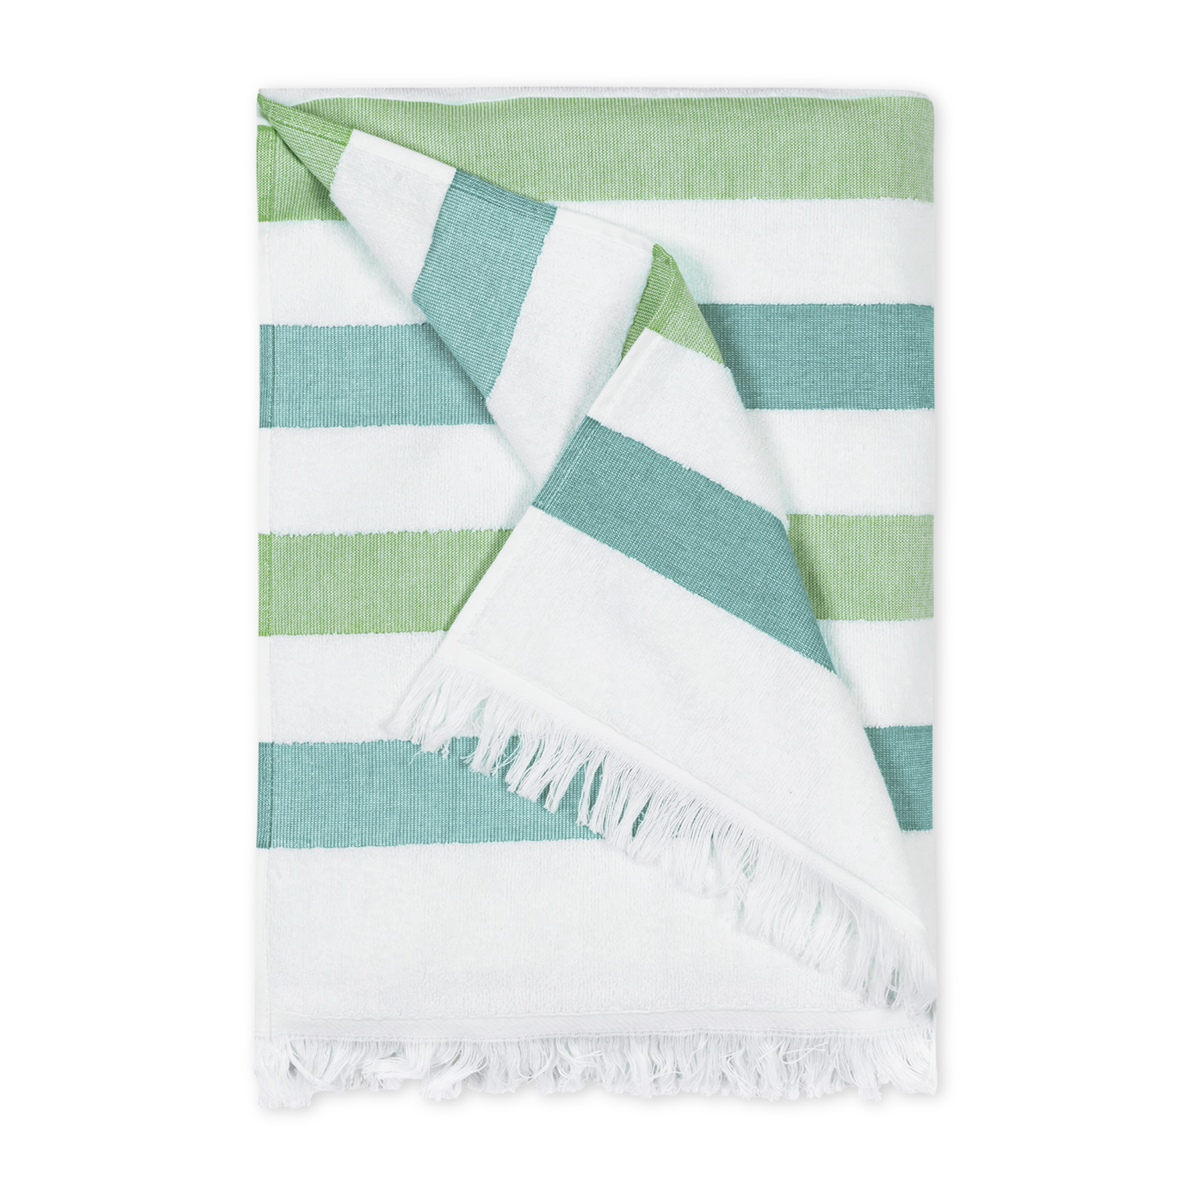 Folded Matouk Amado Pool and Beach Towels in Palm Stripe Color